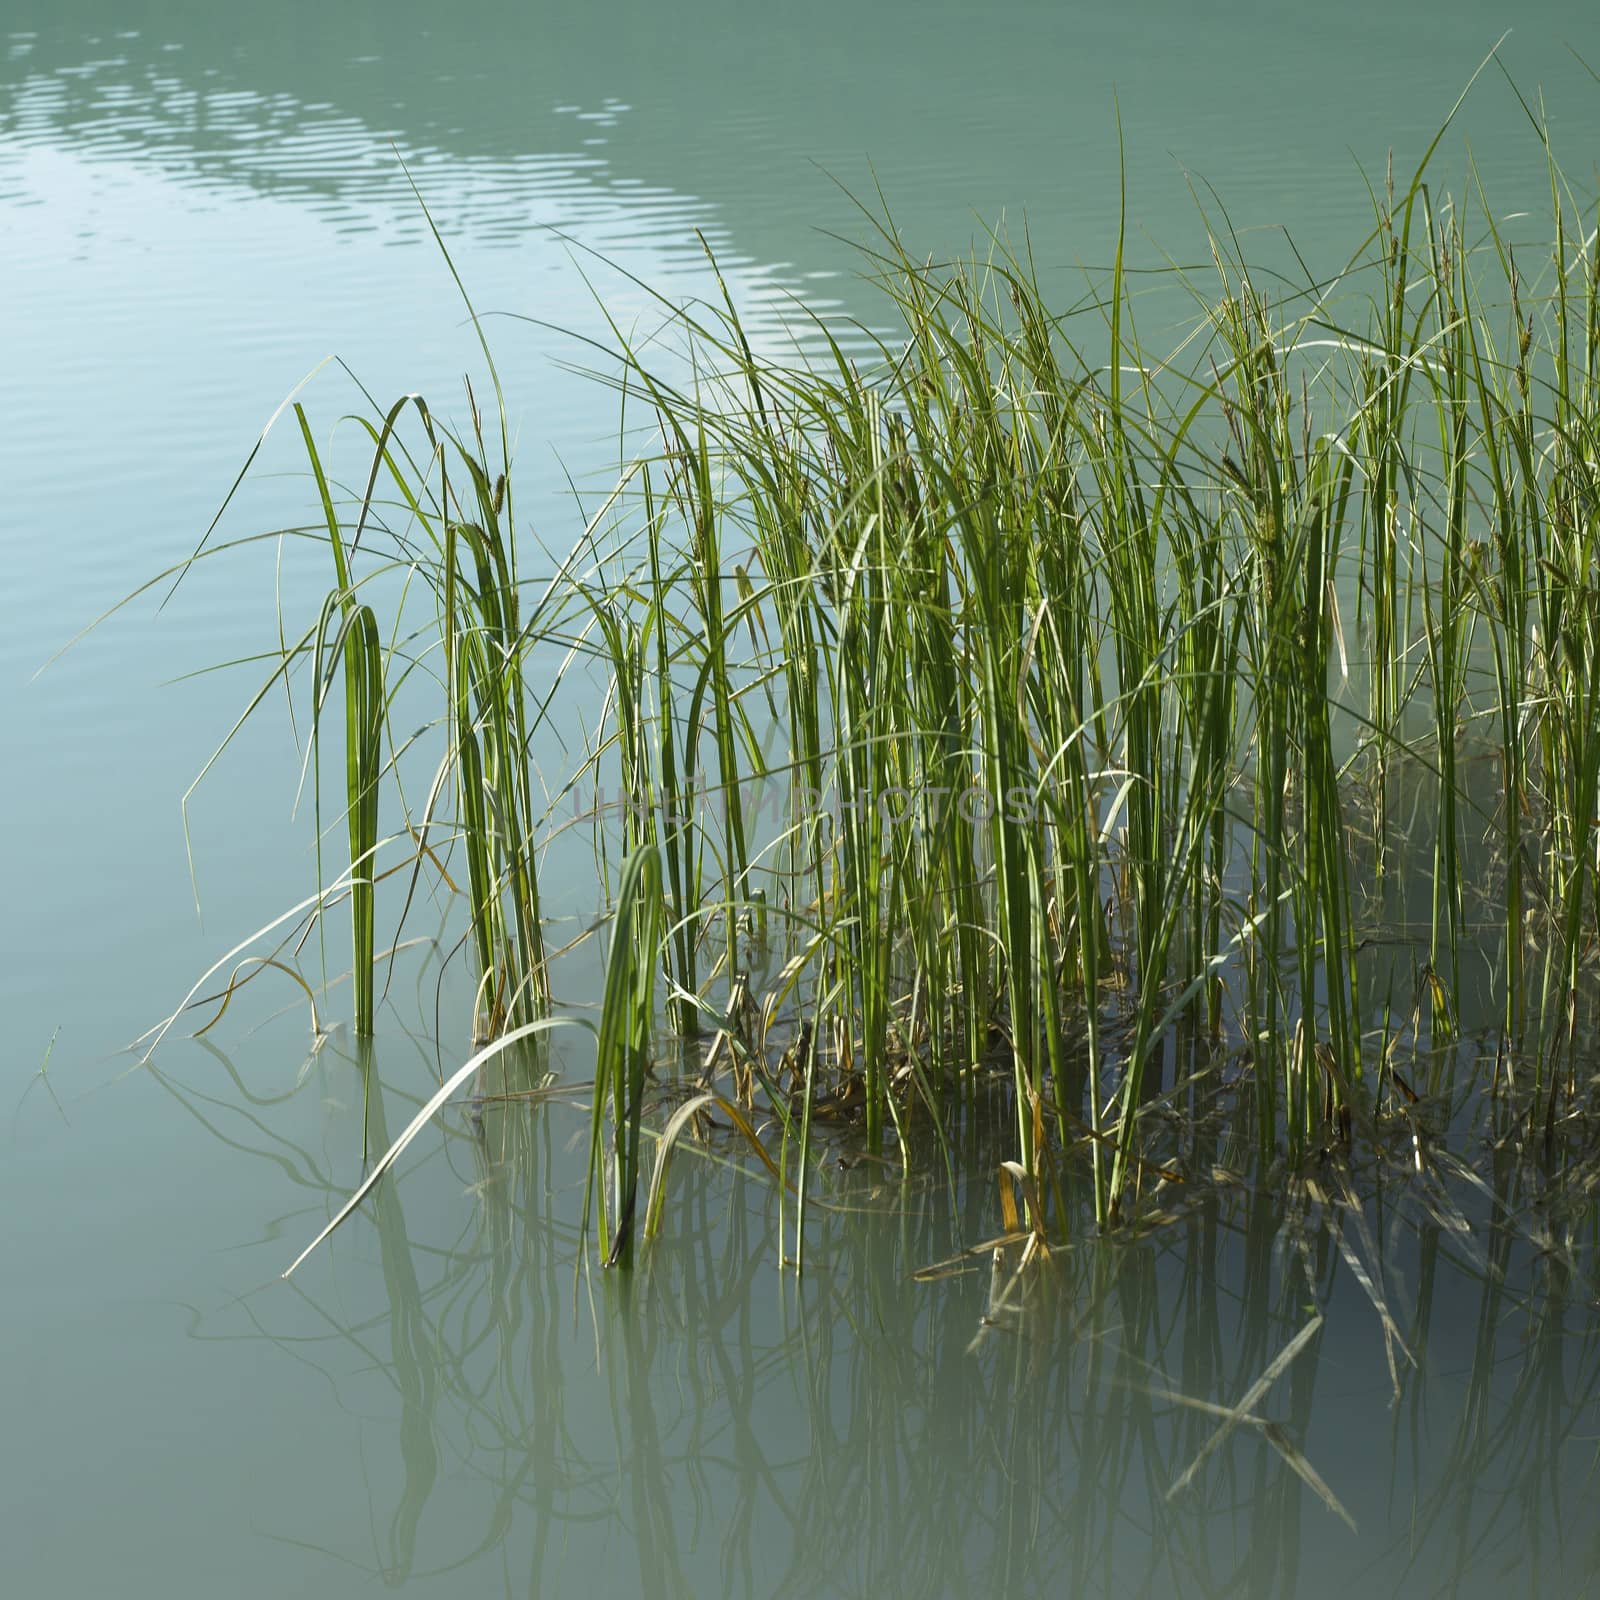 Grass in lake by mmm